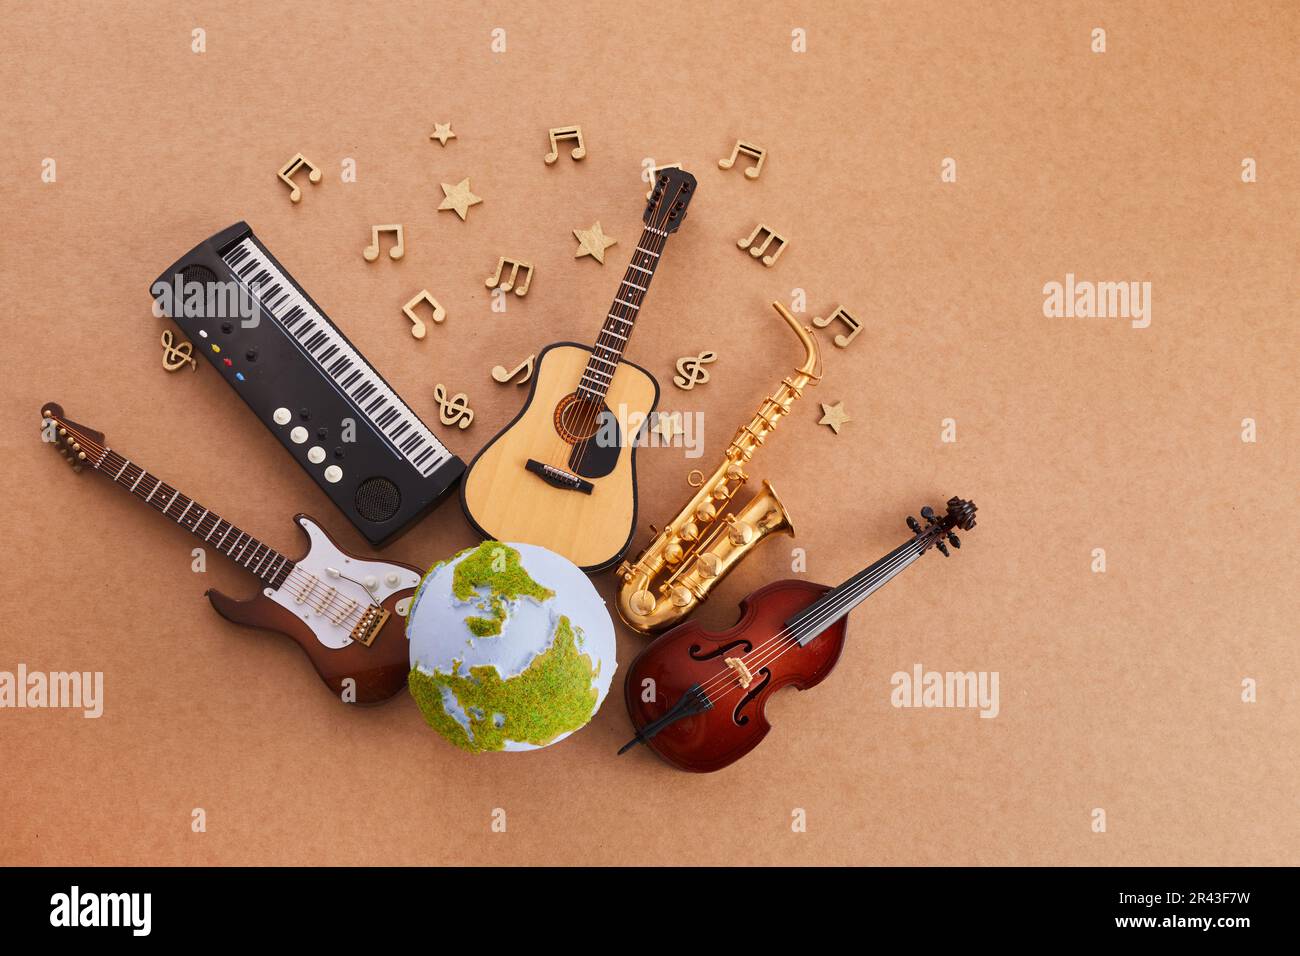 Happy world music day. Musical instruments with globe background. Stock Photo